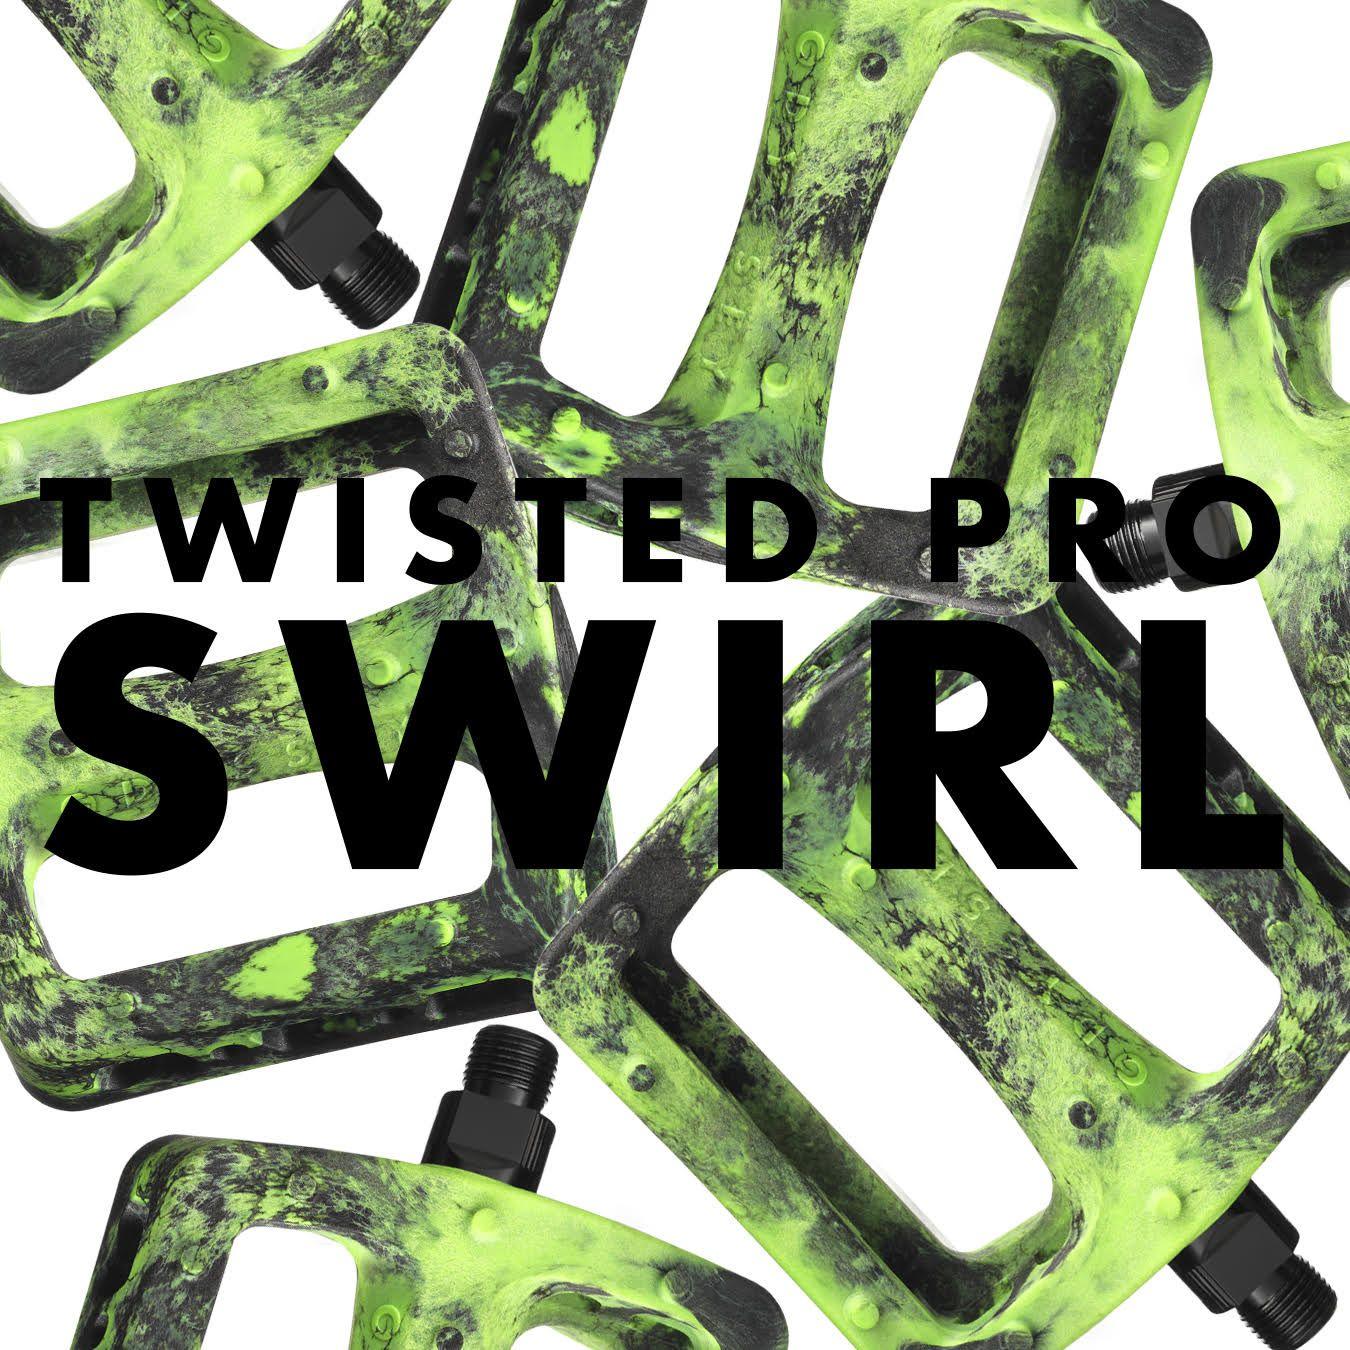 Black and Green Swirl Logo - Twisted Pro Pedals in Black/Fluorescent Green Swirl | Odyssey BMX